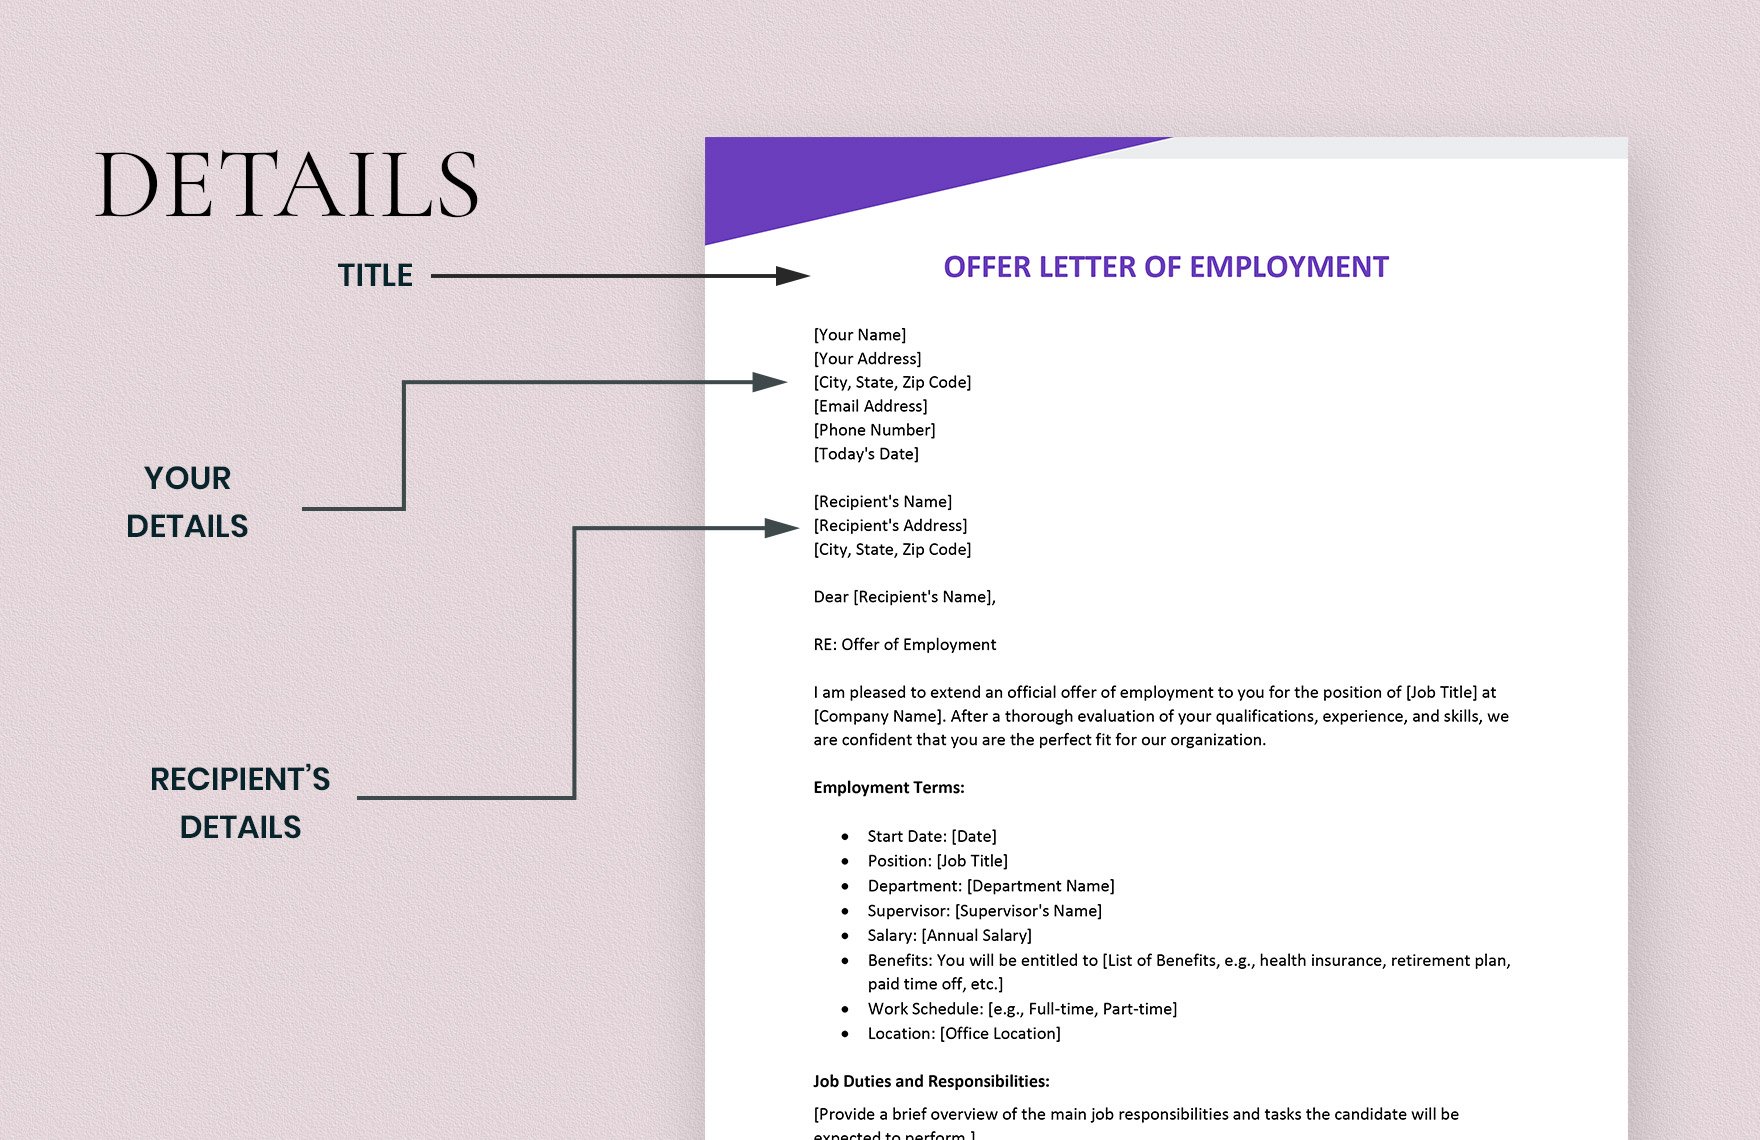 Offer Letter of Employment